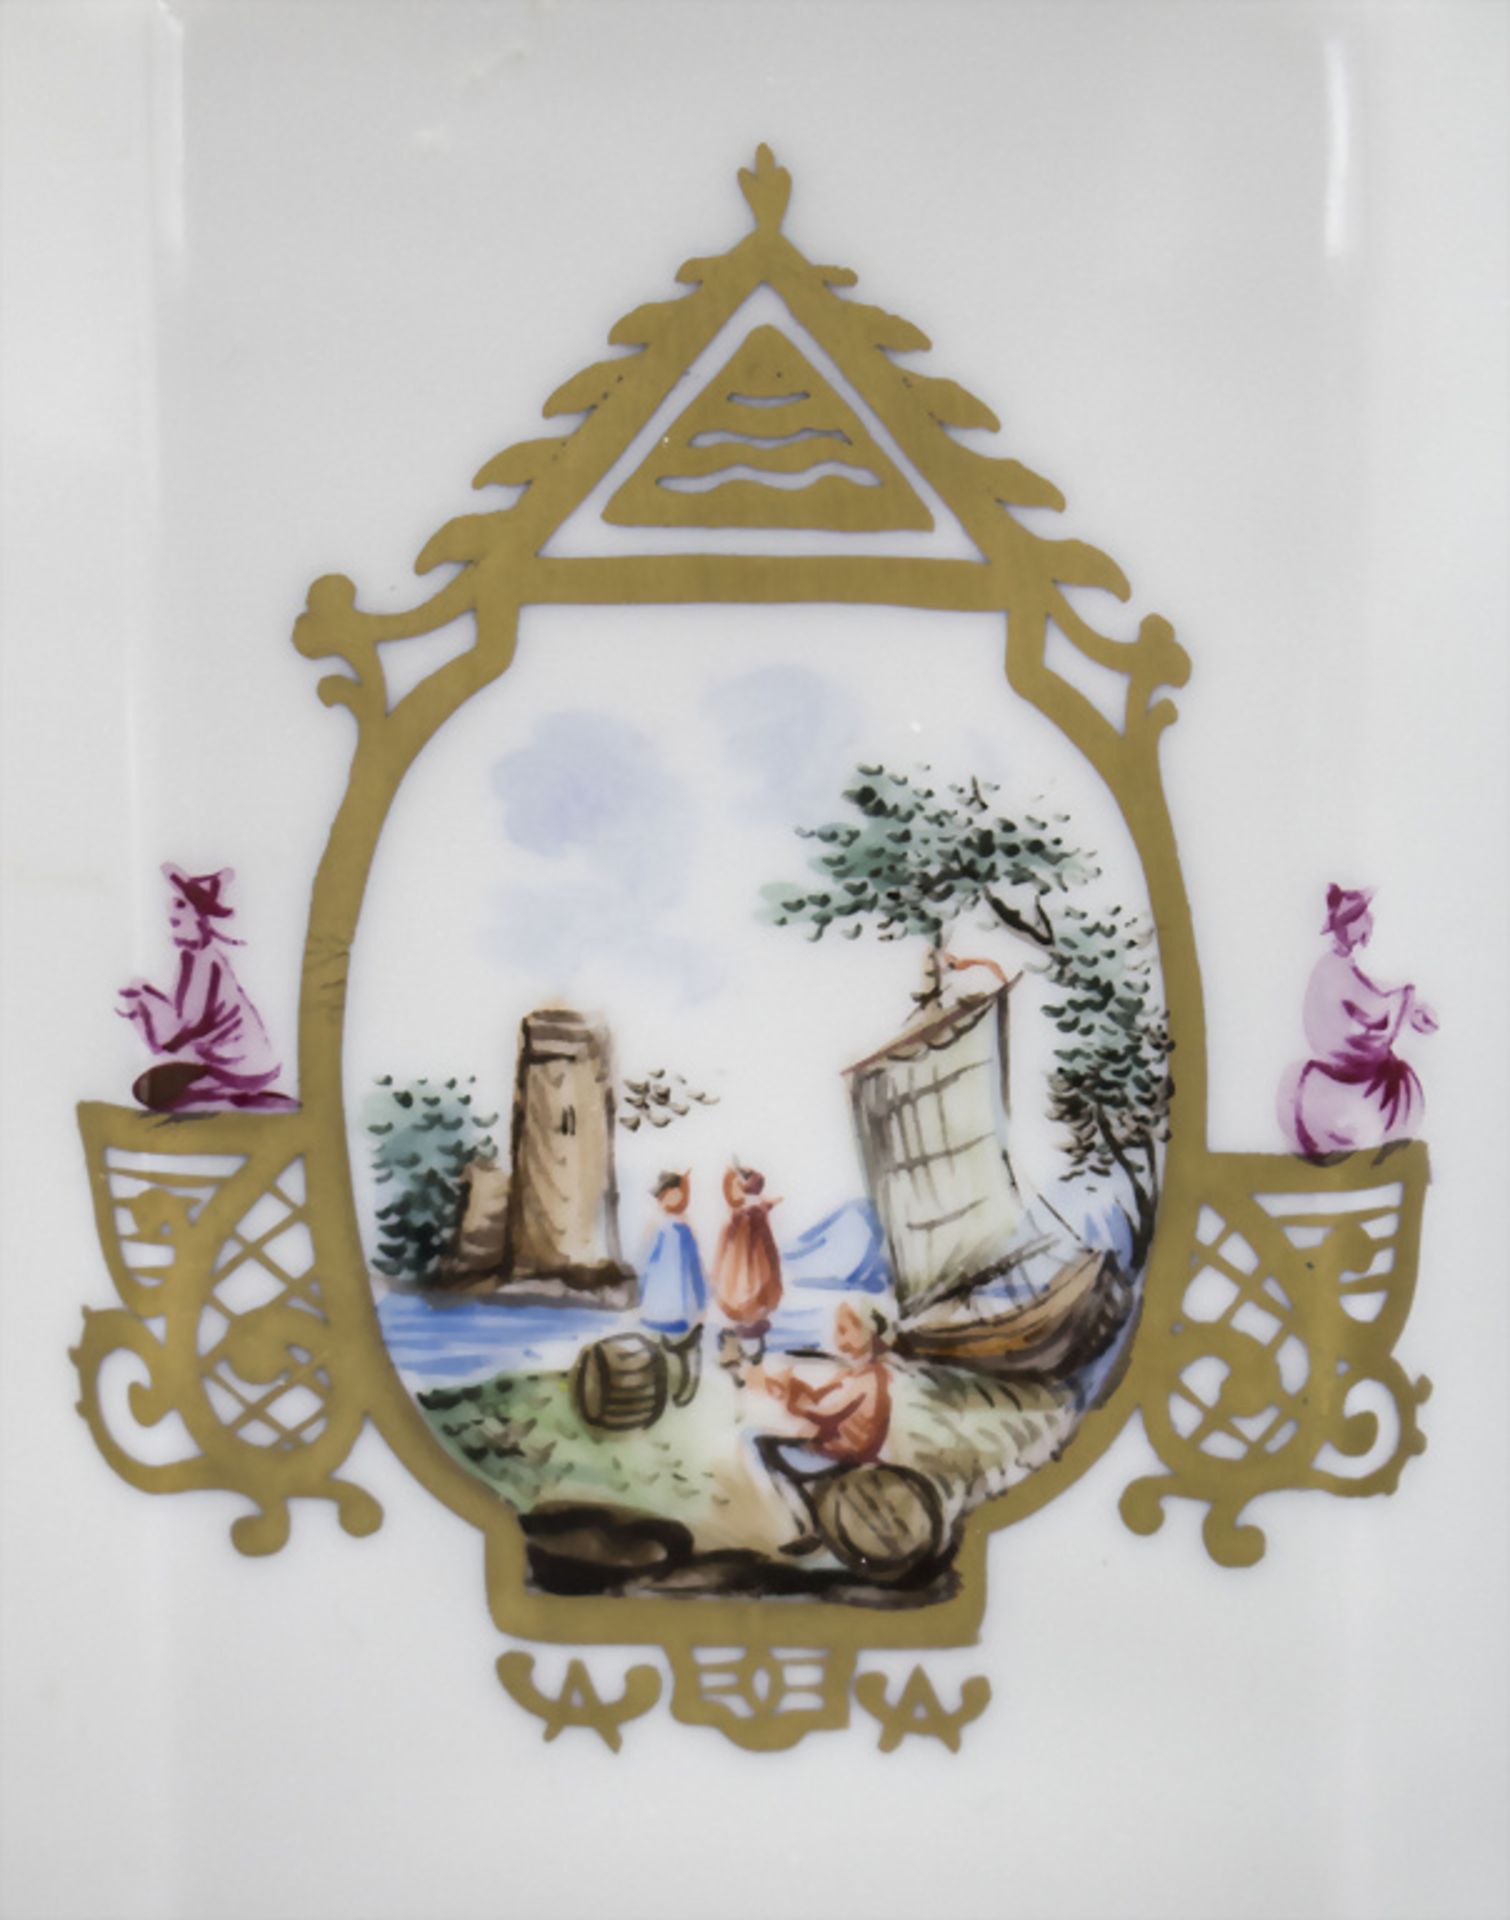 Teedose mit Chinoiserien / A tea caddy with Chinoiserie scenes, Carl Thieme, Potschappel, nach 1900 - Image 7 of 8